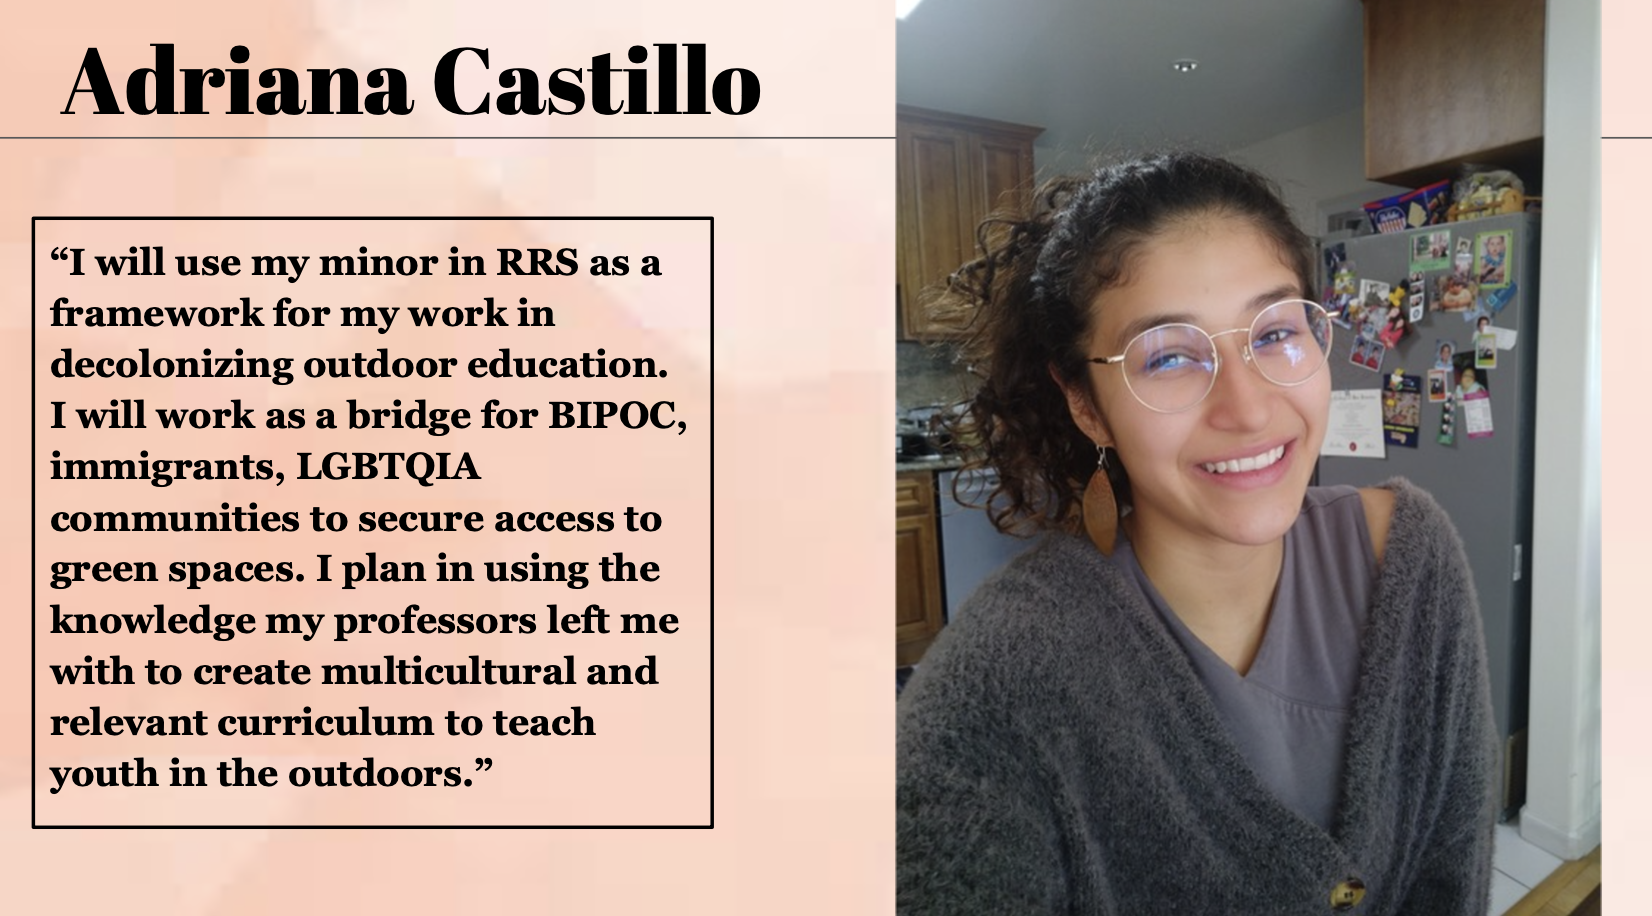 Adriana Castillo will use her minor in RRS as a framework for her work in decolonizing outdoor education.